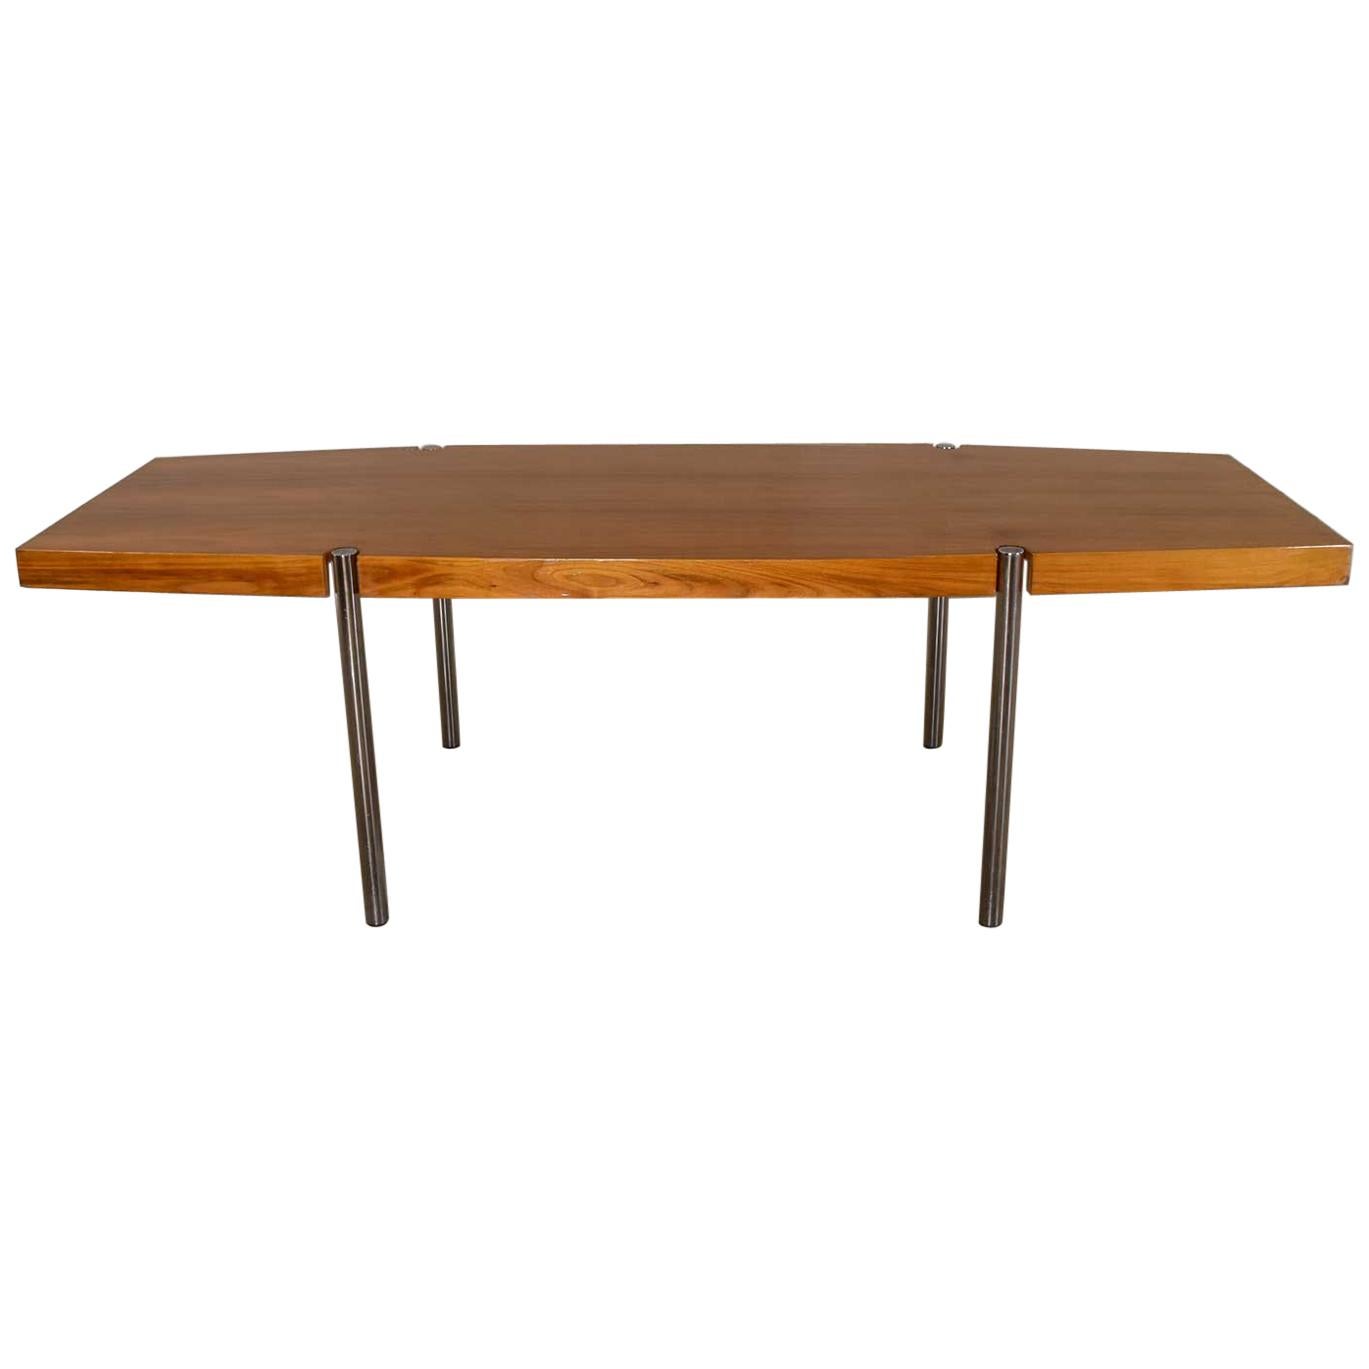 Modern Walnut & Chrome Boat Shape Dining Conference Table by Jens Risom for Howe